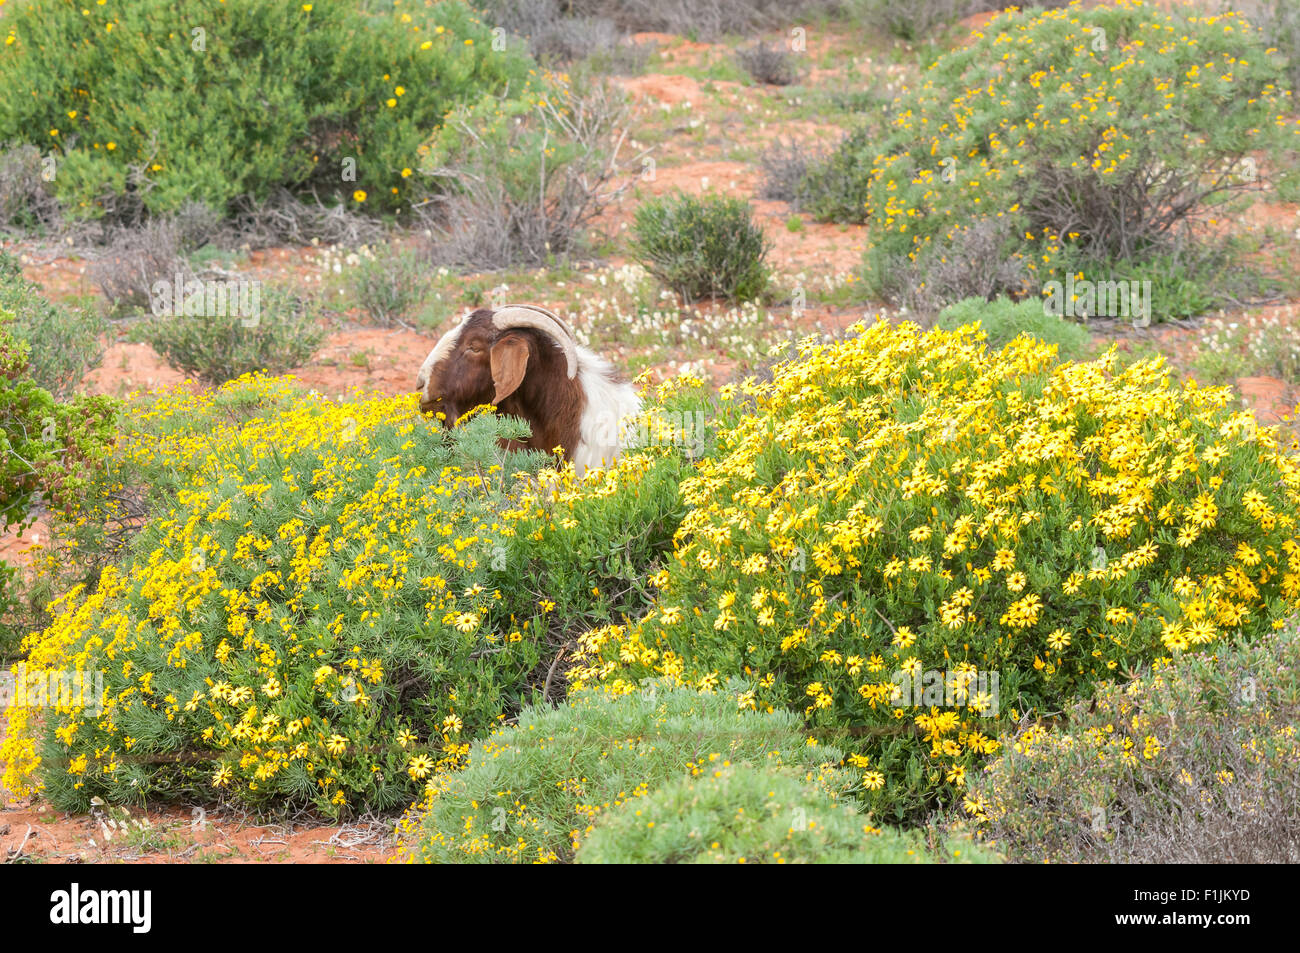 A boerbok (boer goat), a species indigenous to Africa, eats flowers near Strandfontein in the Western Cape Province of South Afr Stock Photo